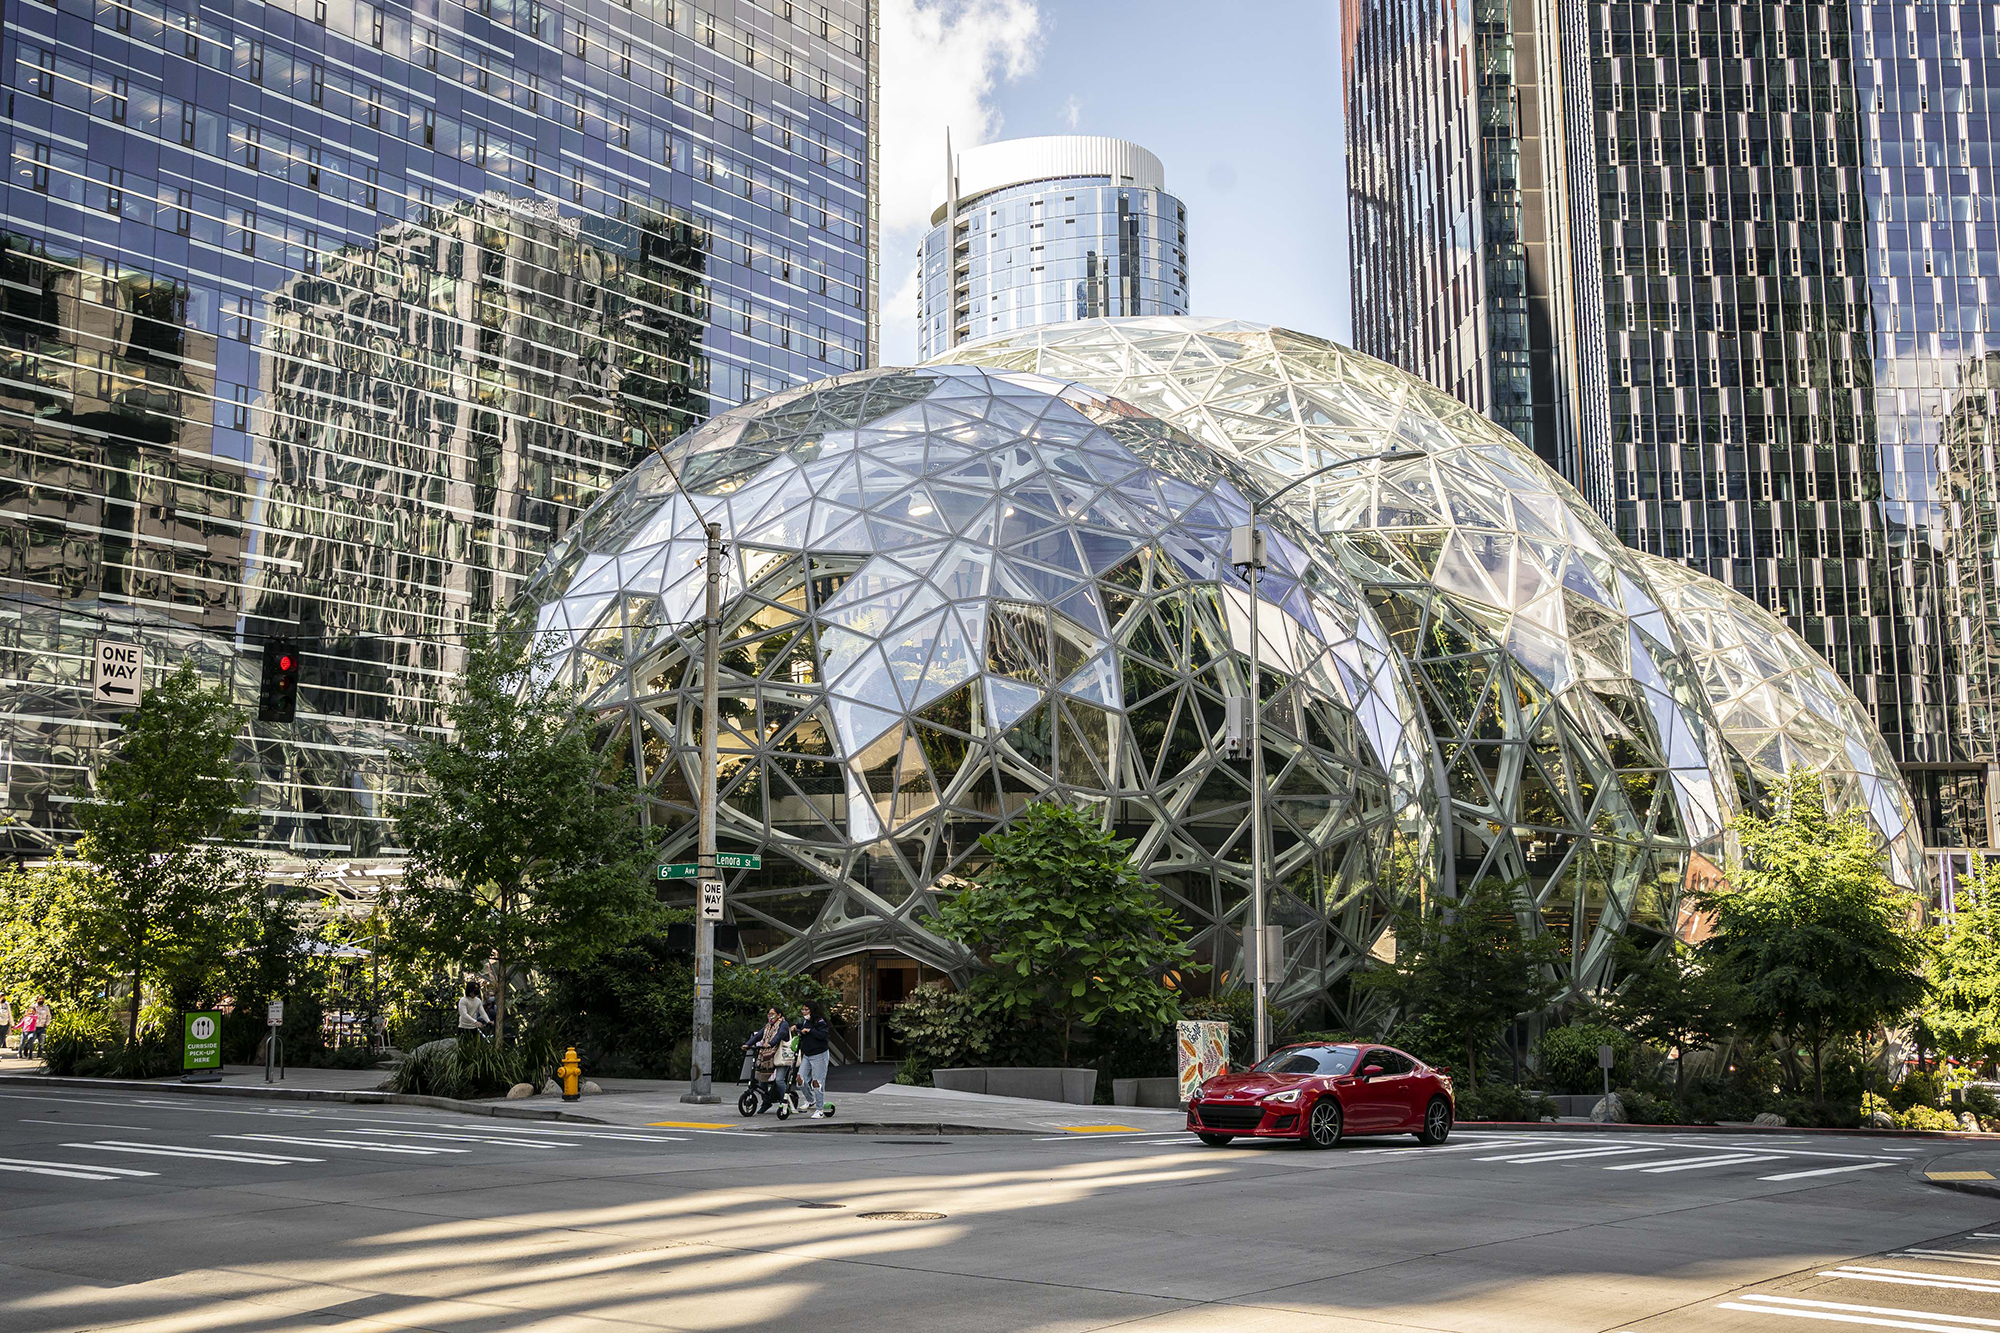 SEATTLE, WA - MAY 20: The exterior of The Spheres are seen at the Amazon.com Inc. headquarters on M...